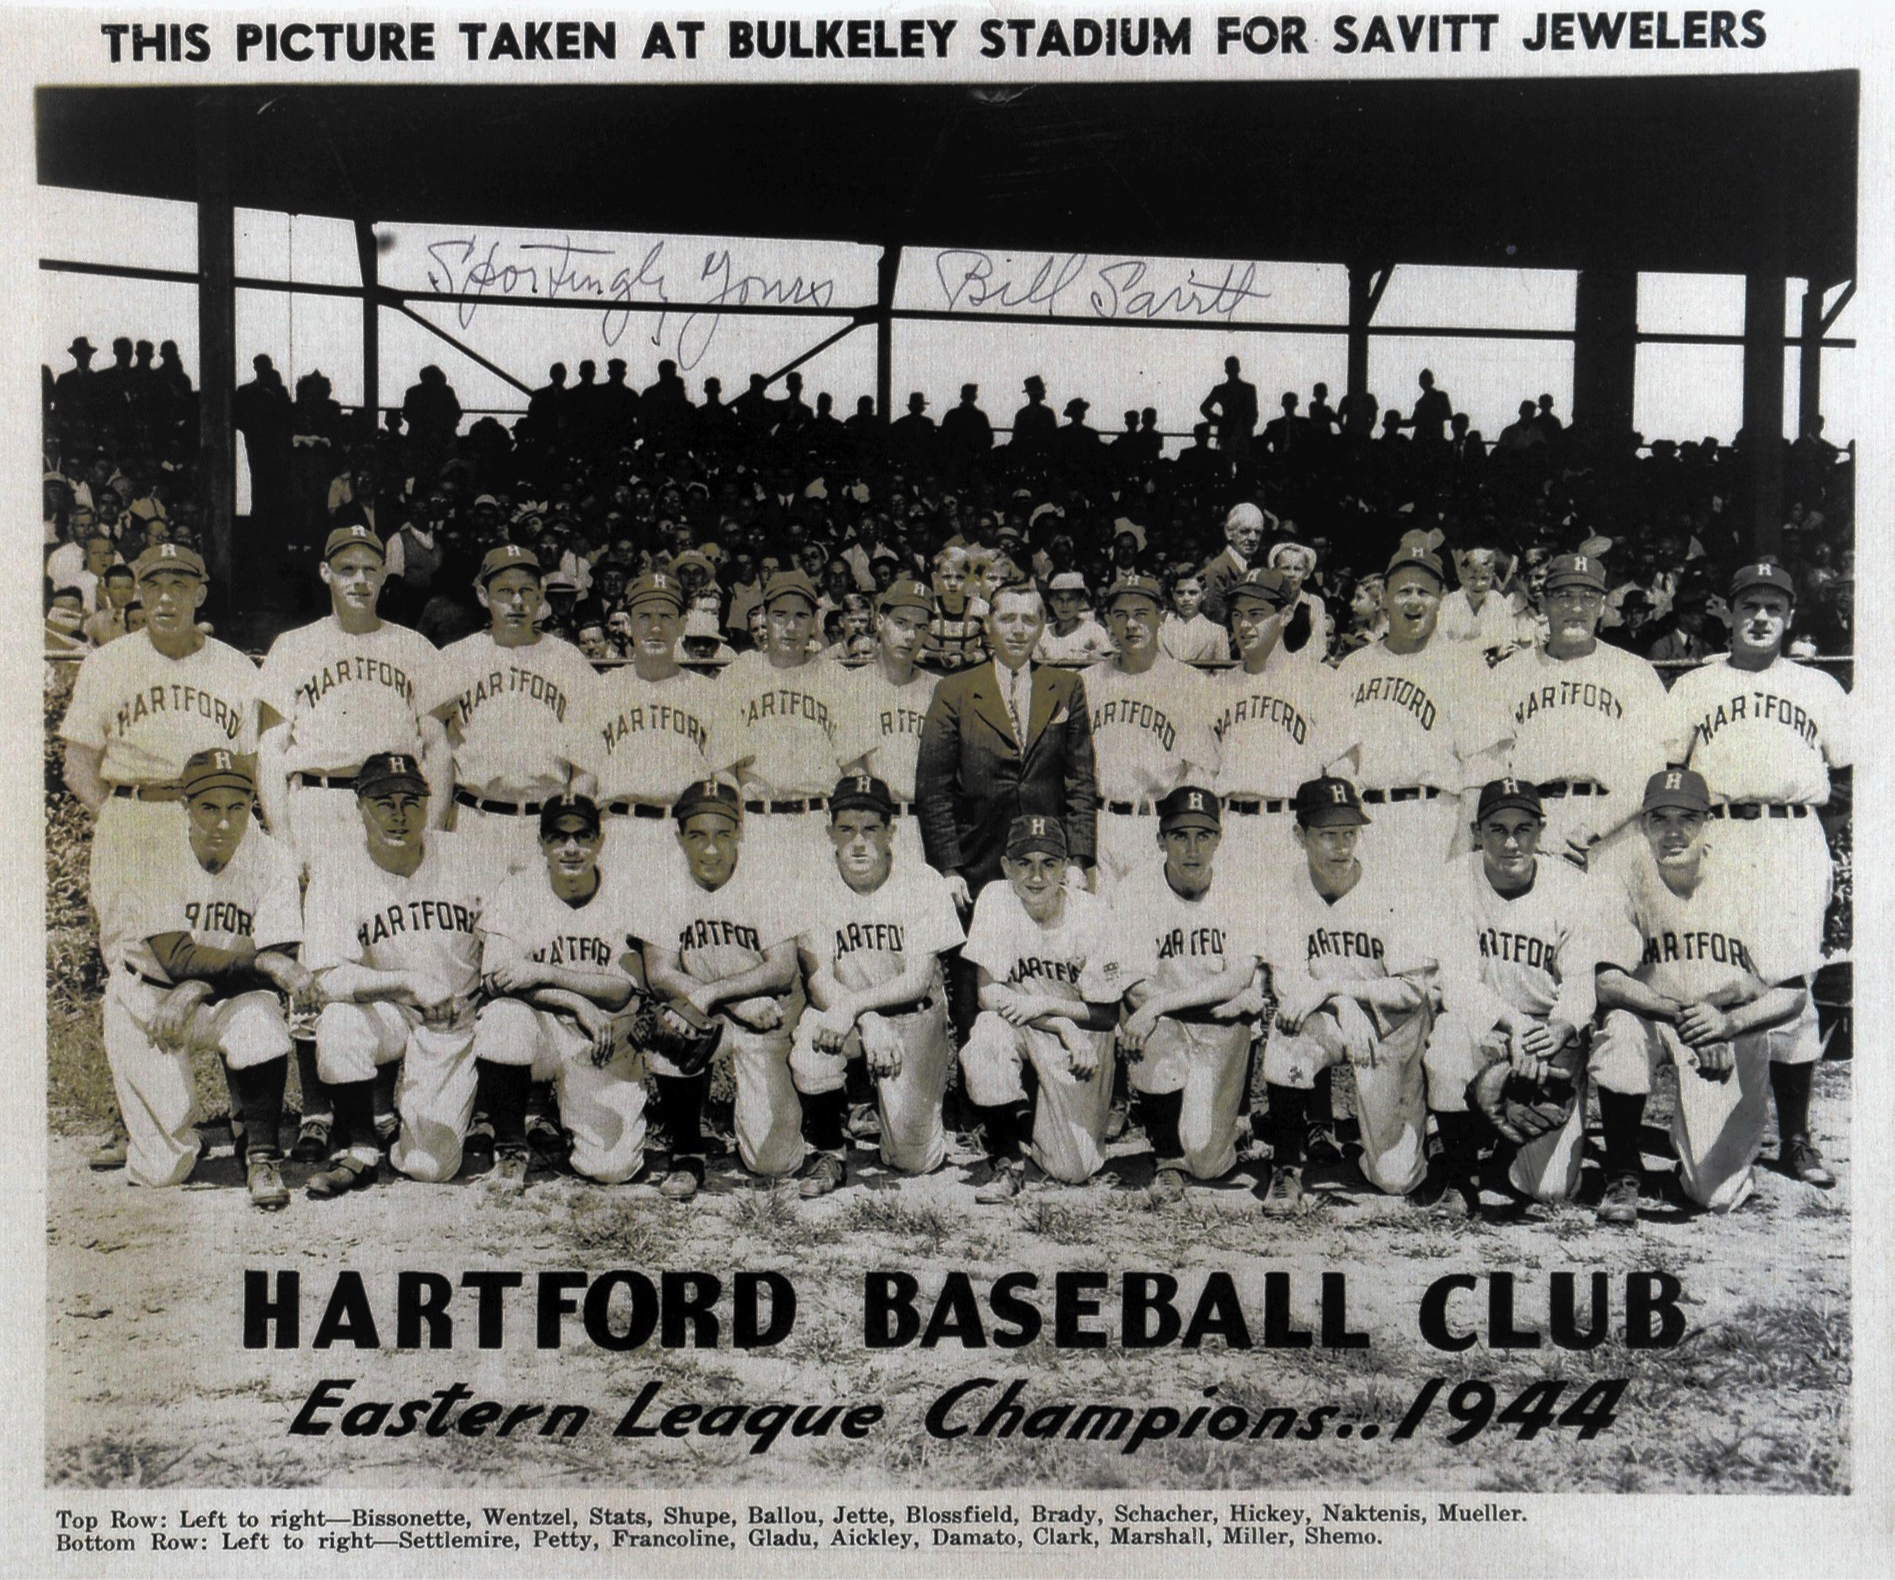 1944 Hartford Bees with Charlie Blossfield (standing, middle).